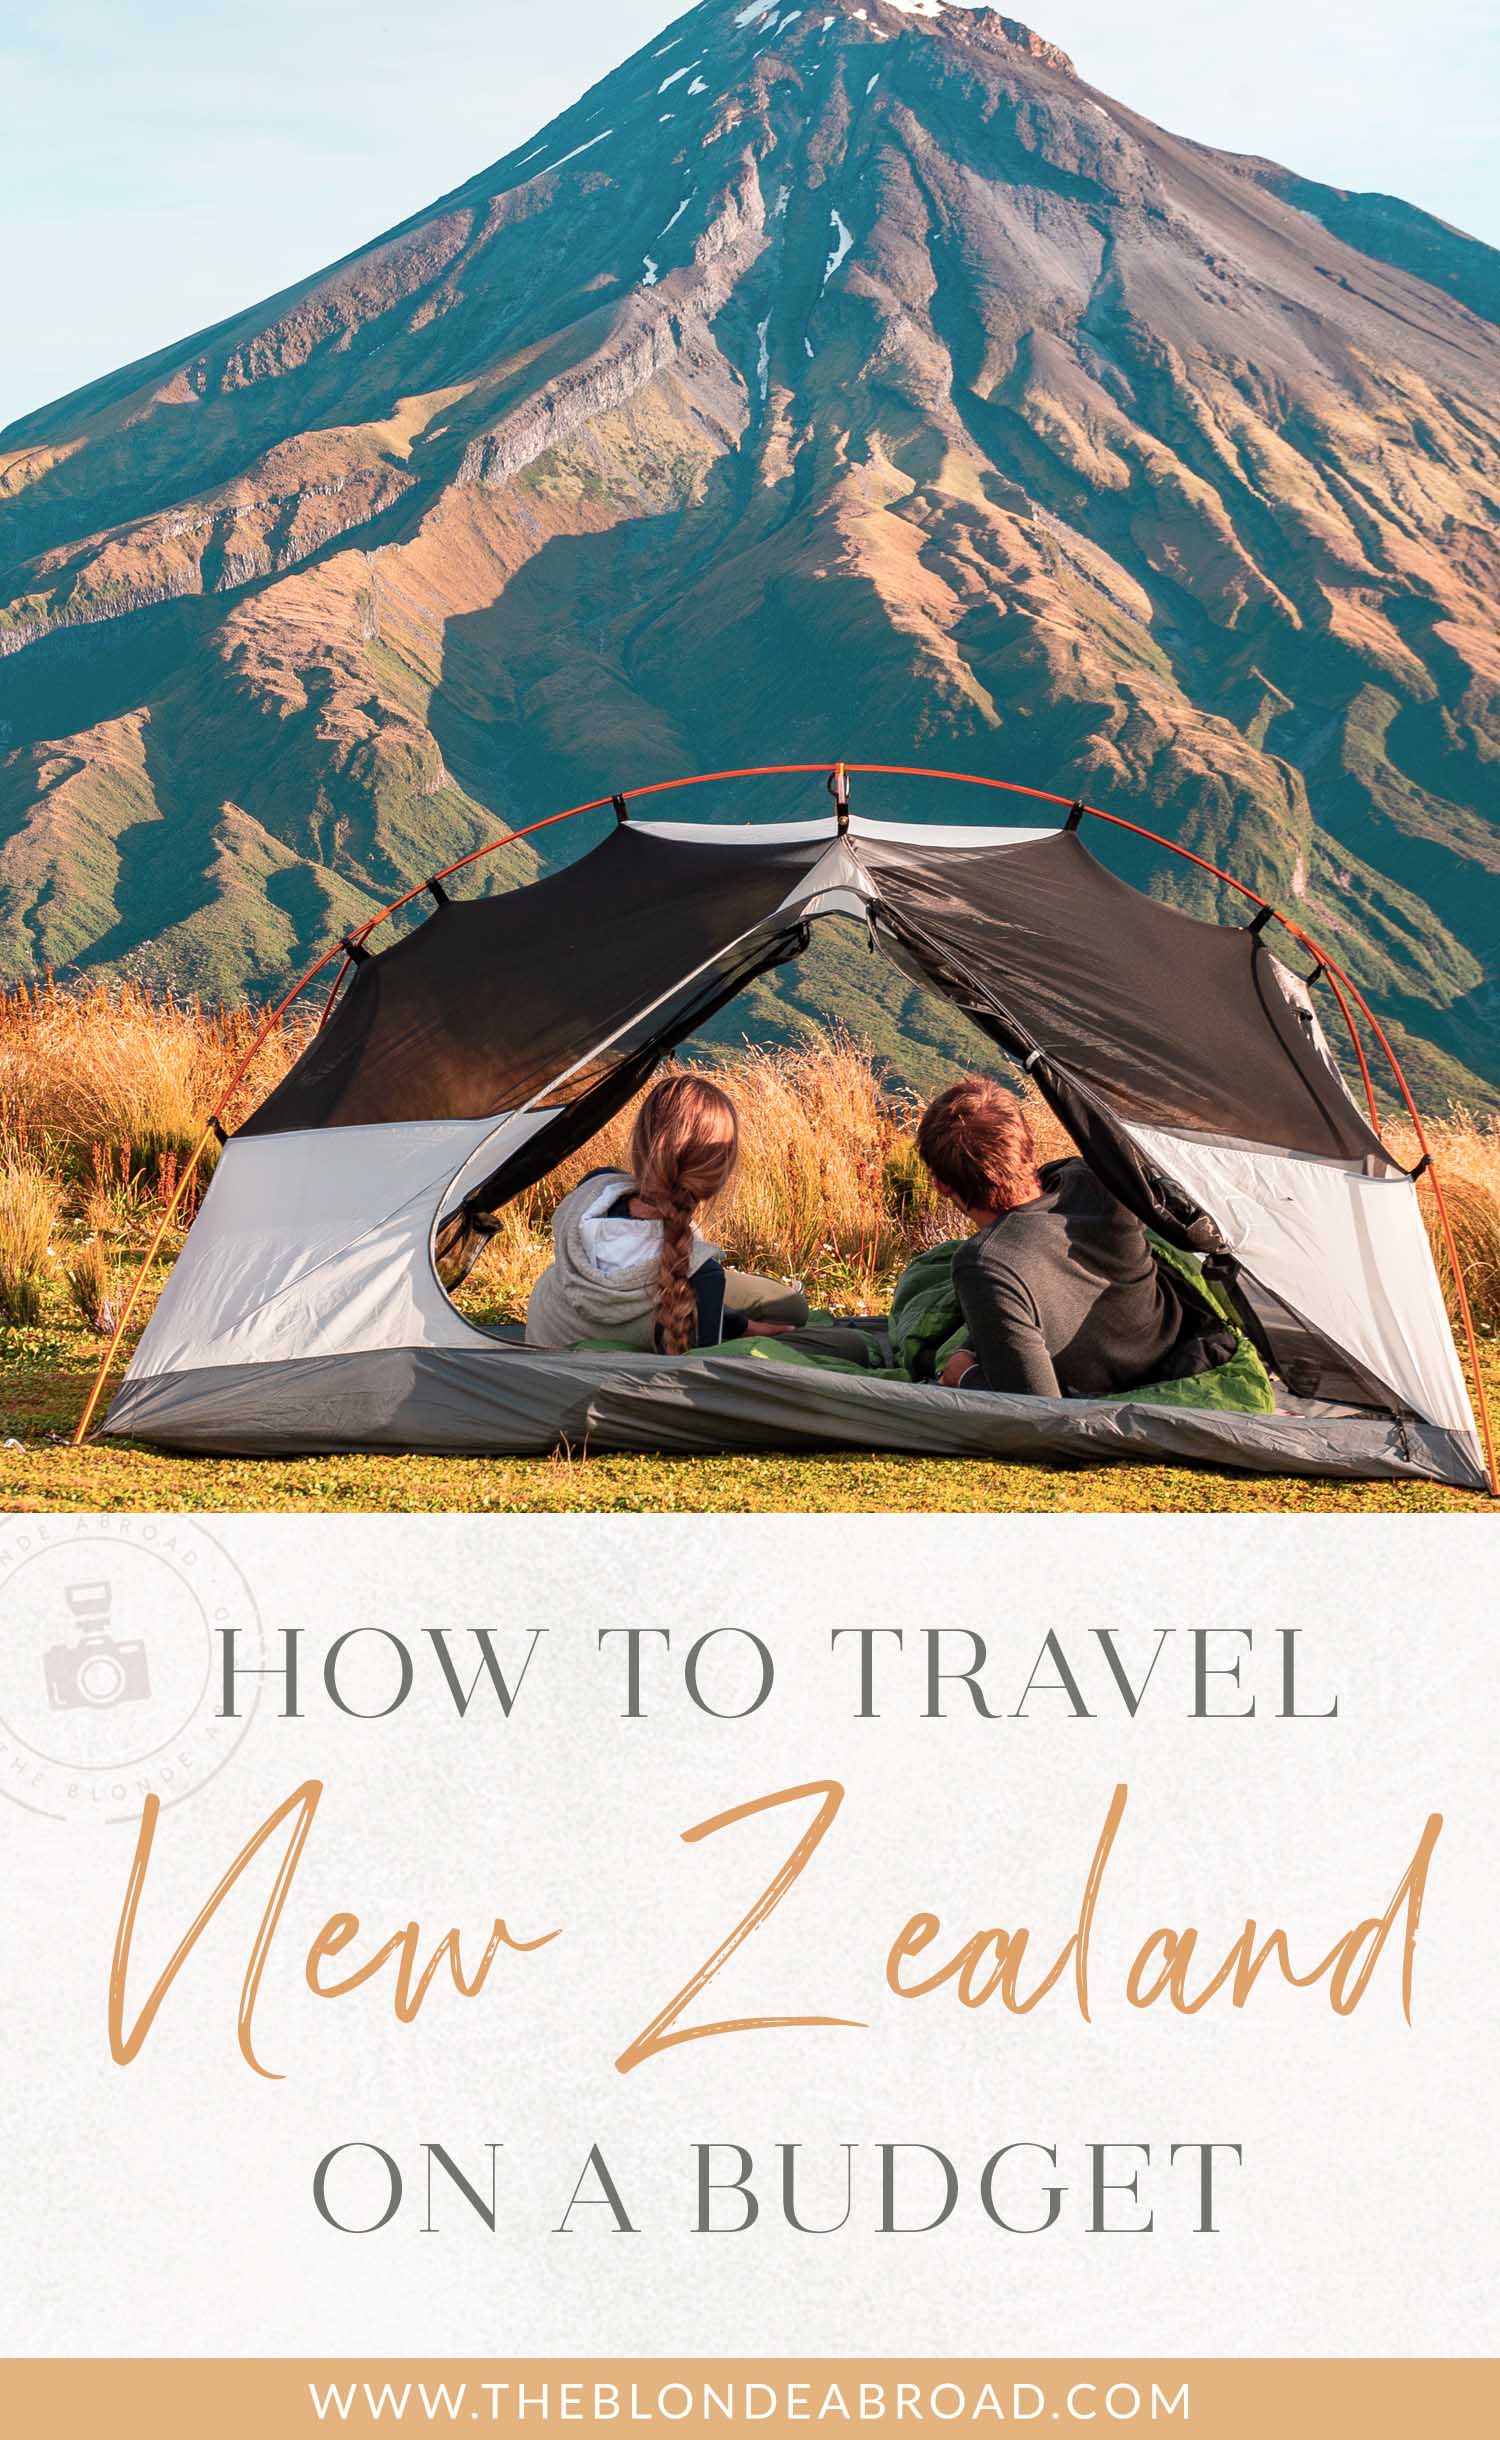 How to Travel New Zealand on a Budget